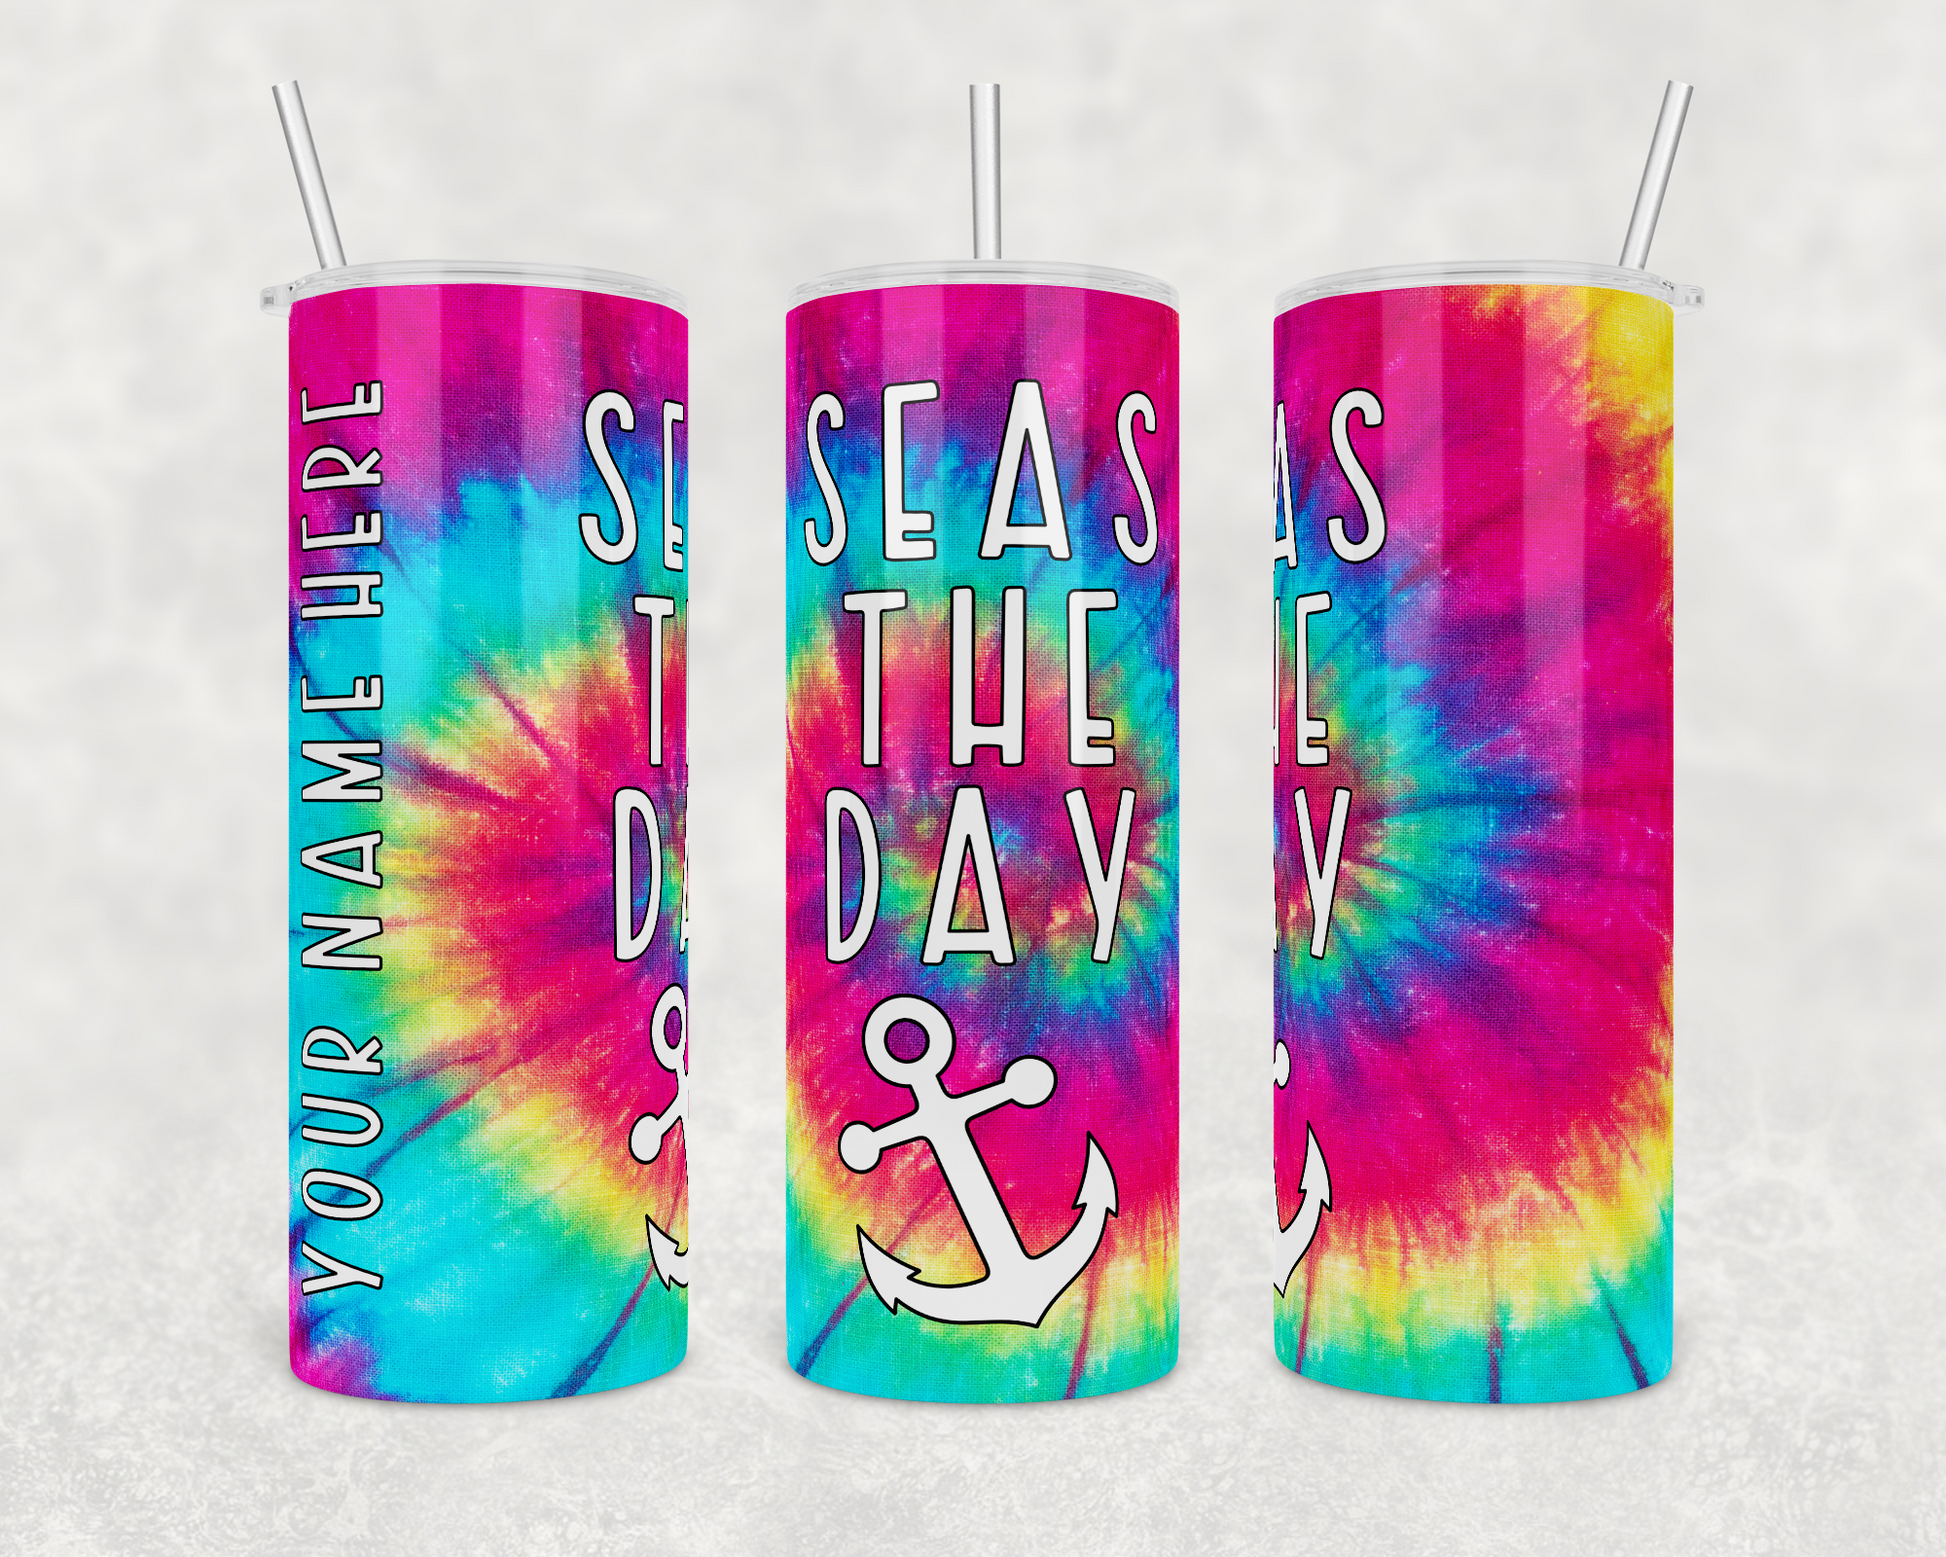 Seas the Day Rainbow Tie Dye Insulated Drink Tumbler - The Salty Anchor